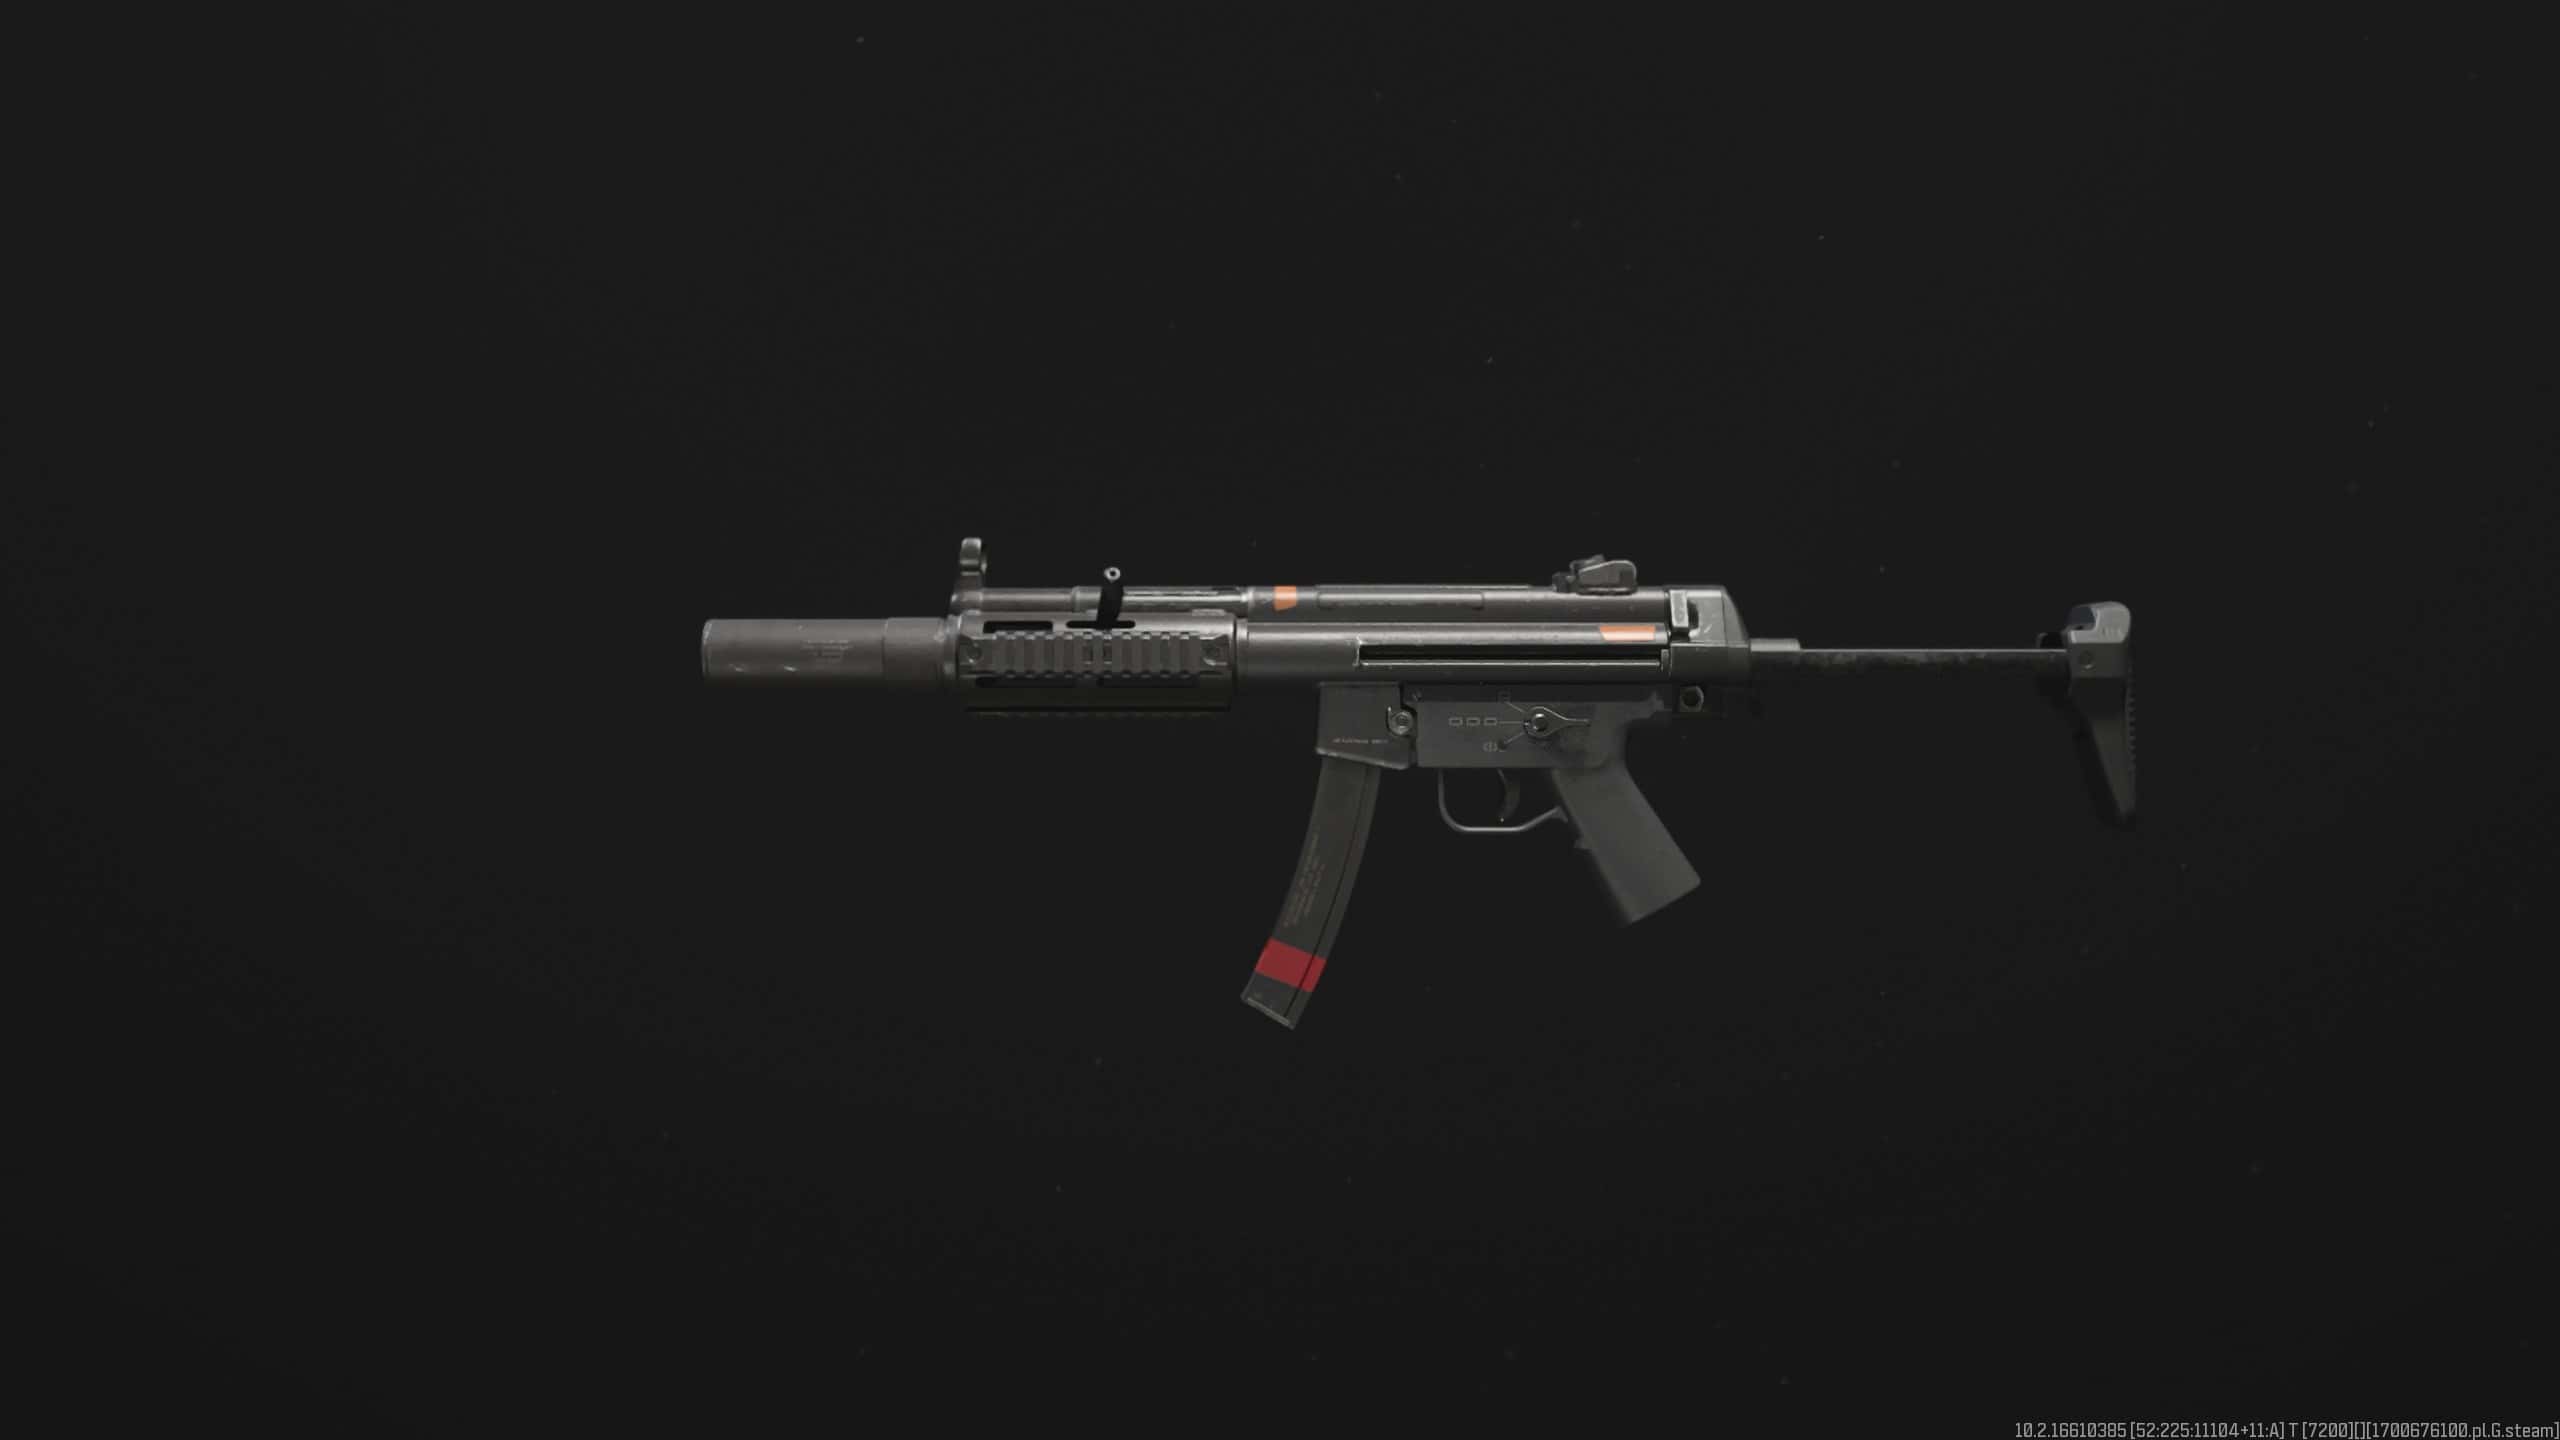 While the Lachmann Shroud is a good burst-fire option, we prefer the Lachmann Sub's full rate of fire in MW3. Image captured by VideoGamer.